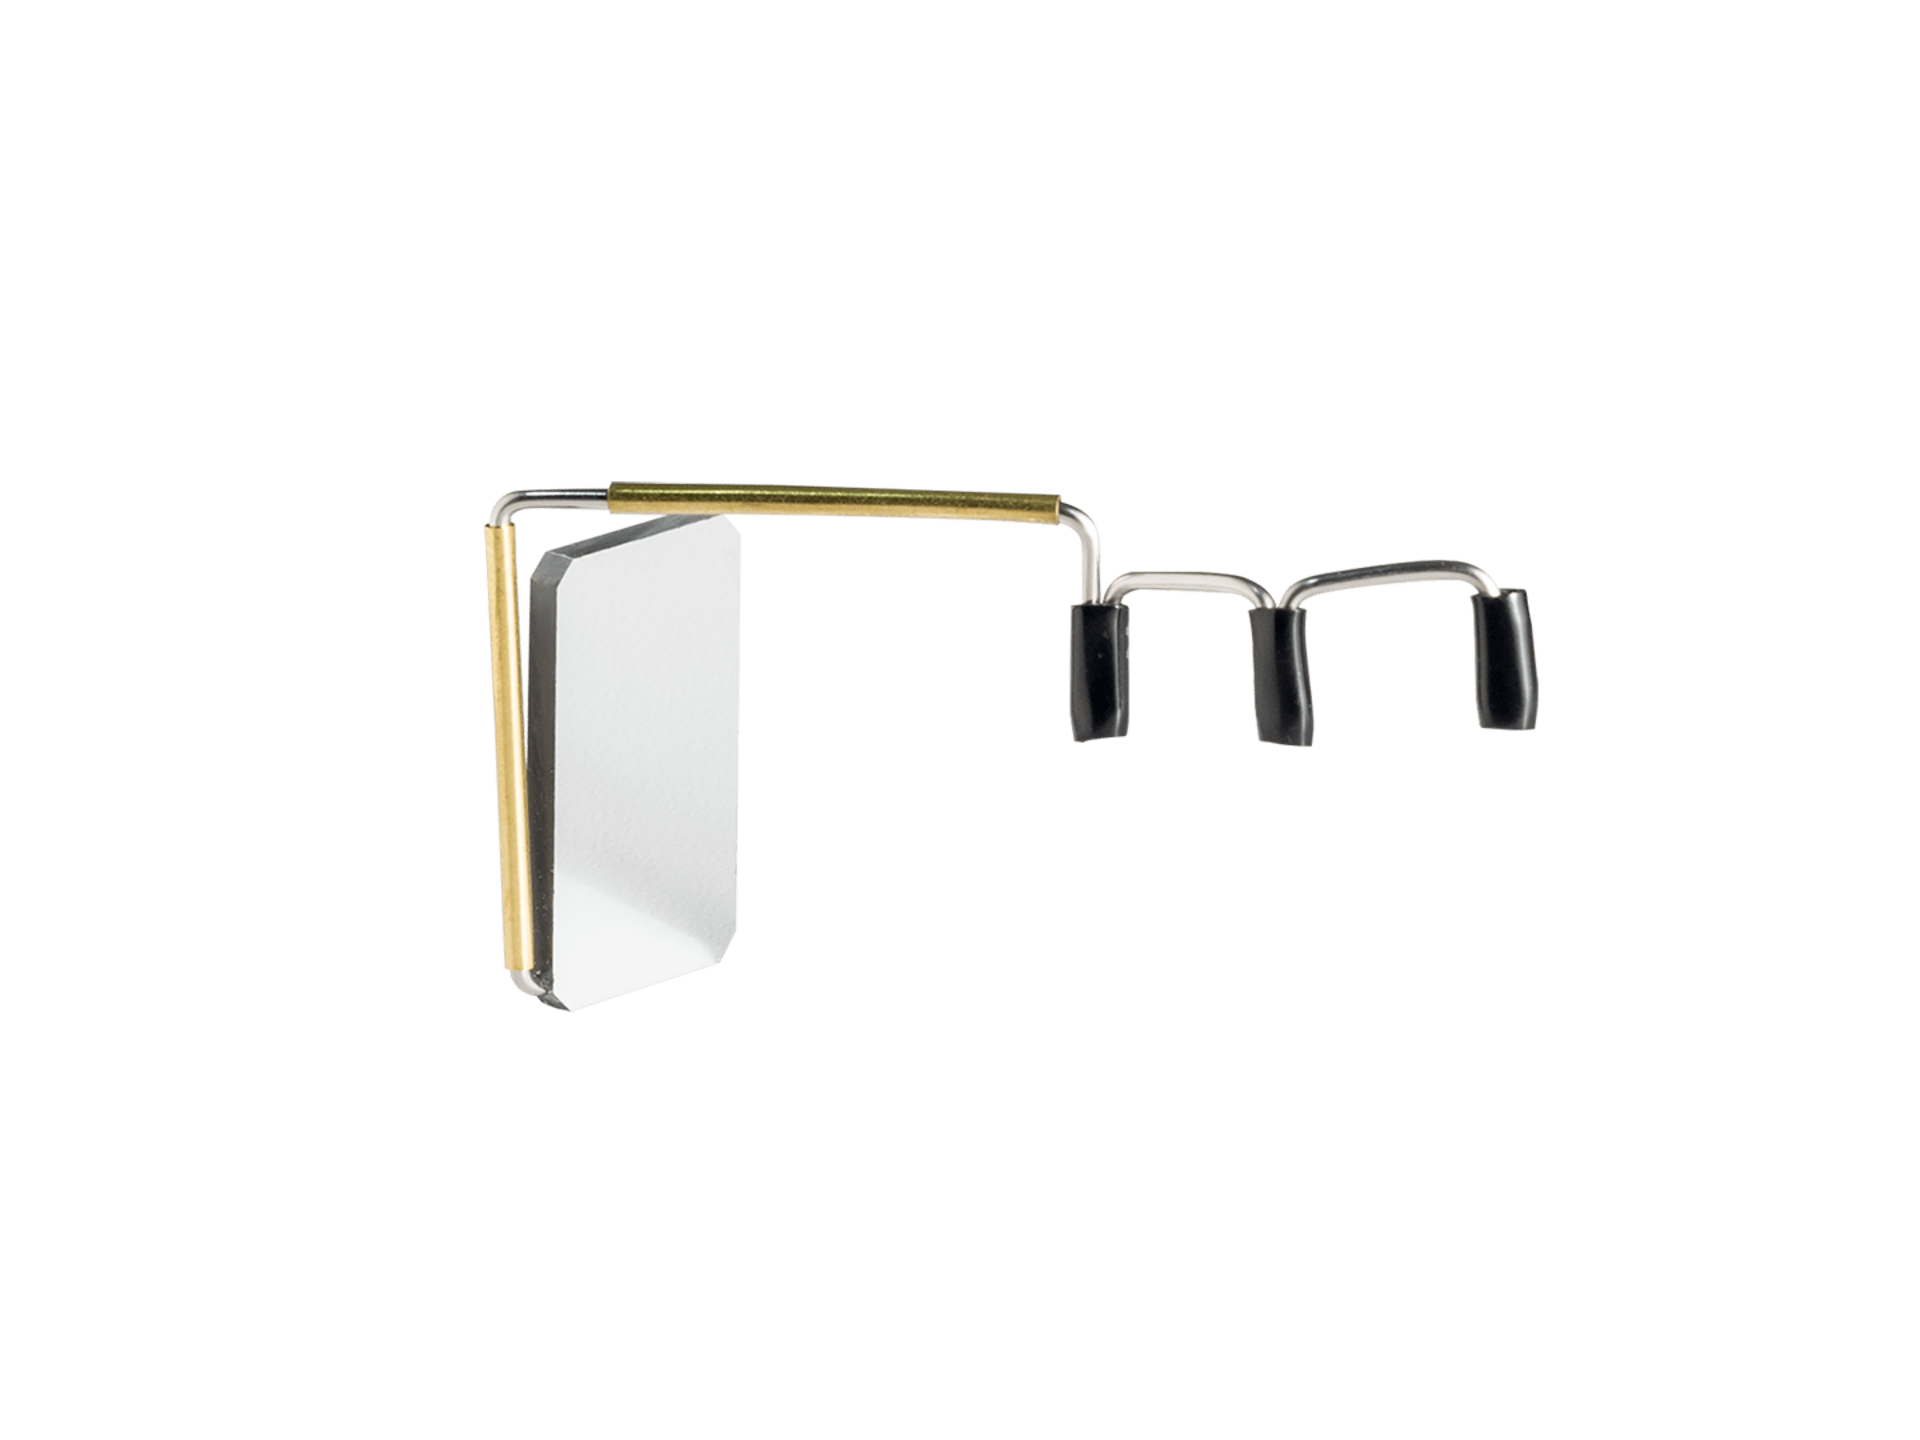 Take-A-Look Cycling Mirror Compact